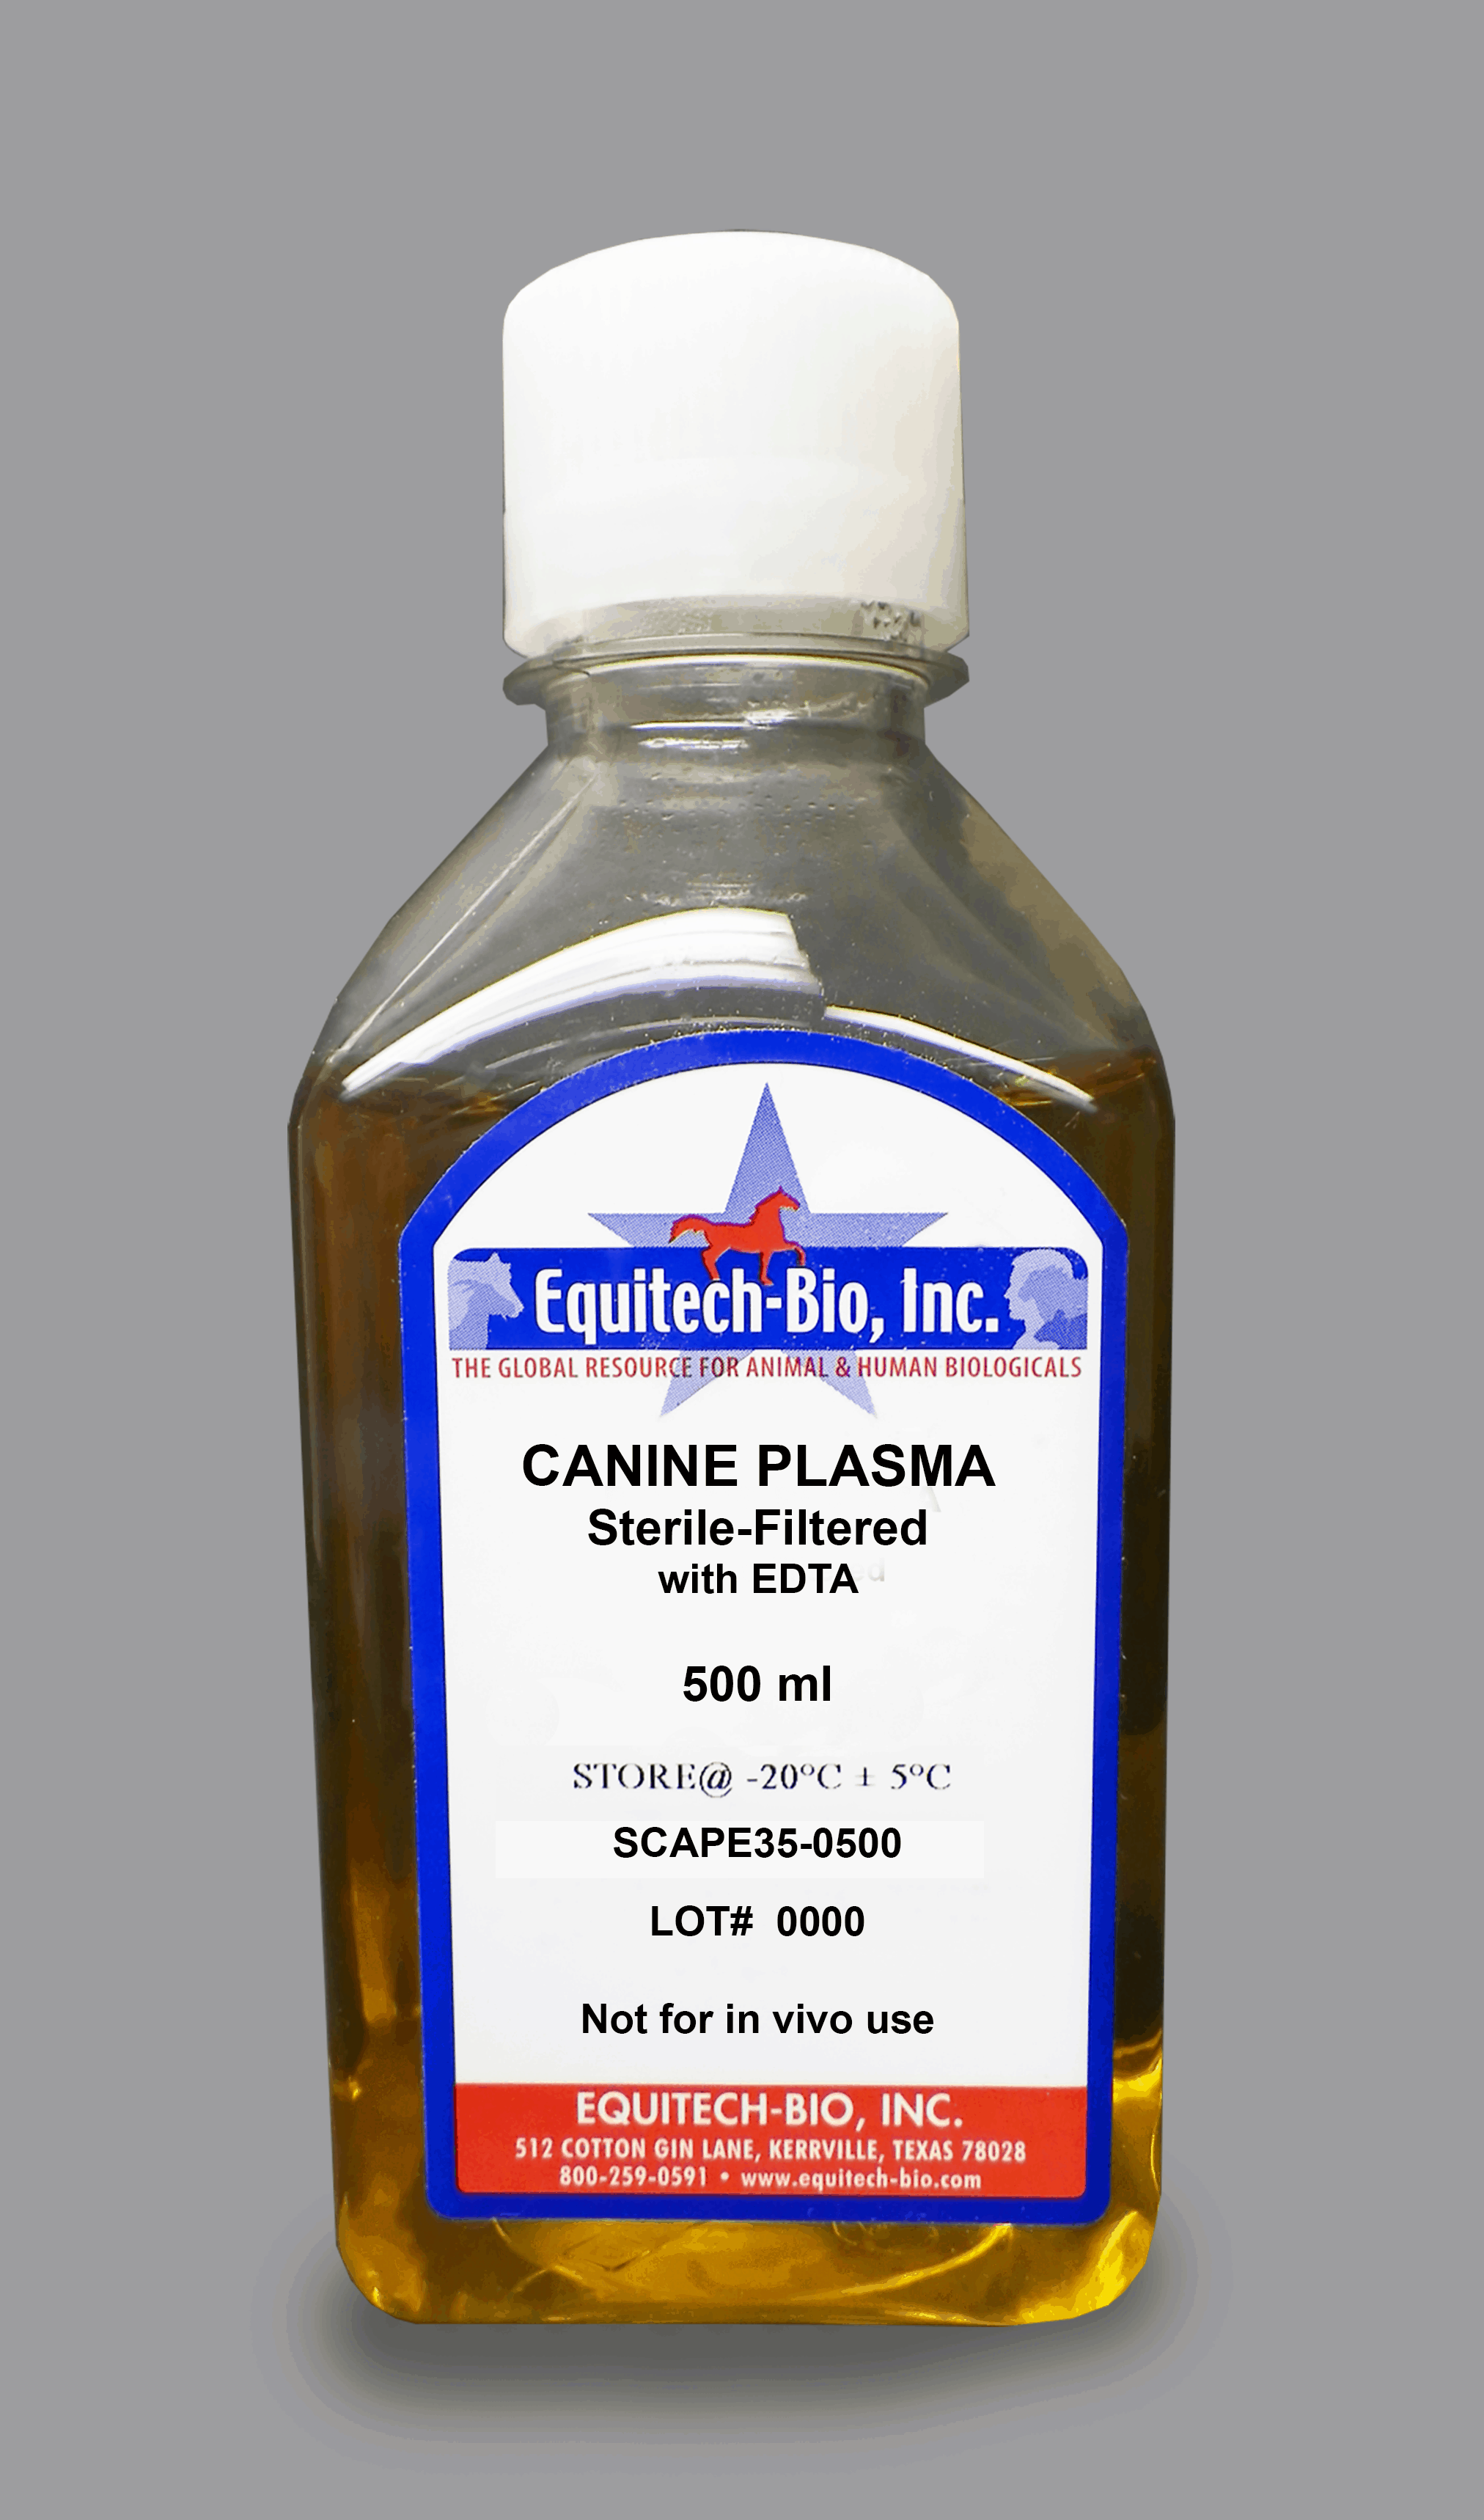 SCAPE35 -- Sterile Filtered Canine Plasma with EDTA